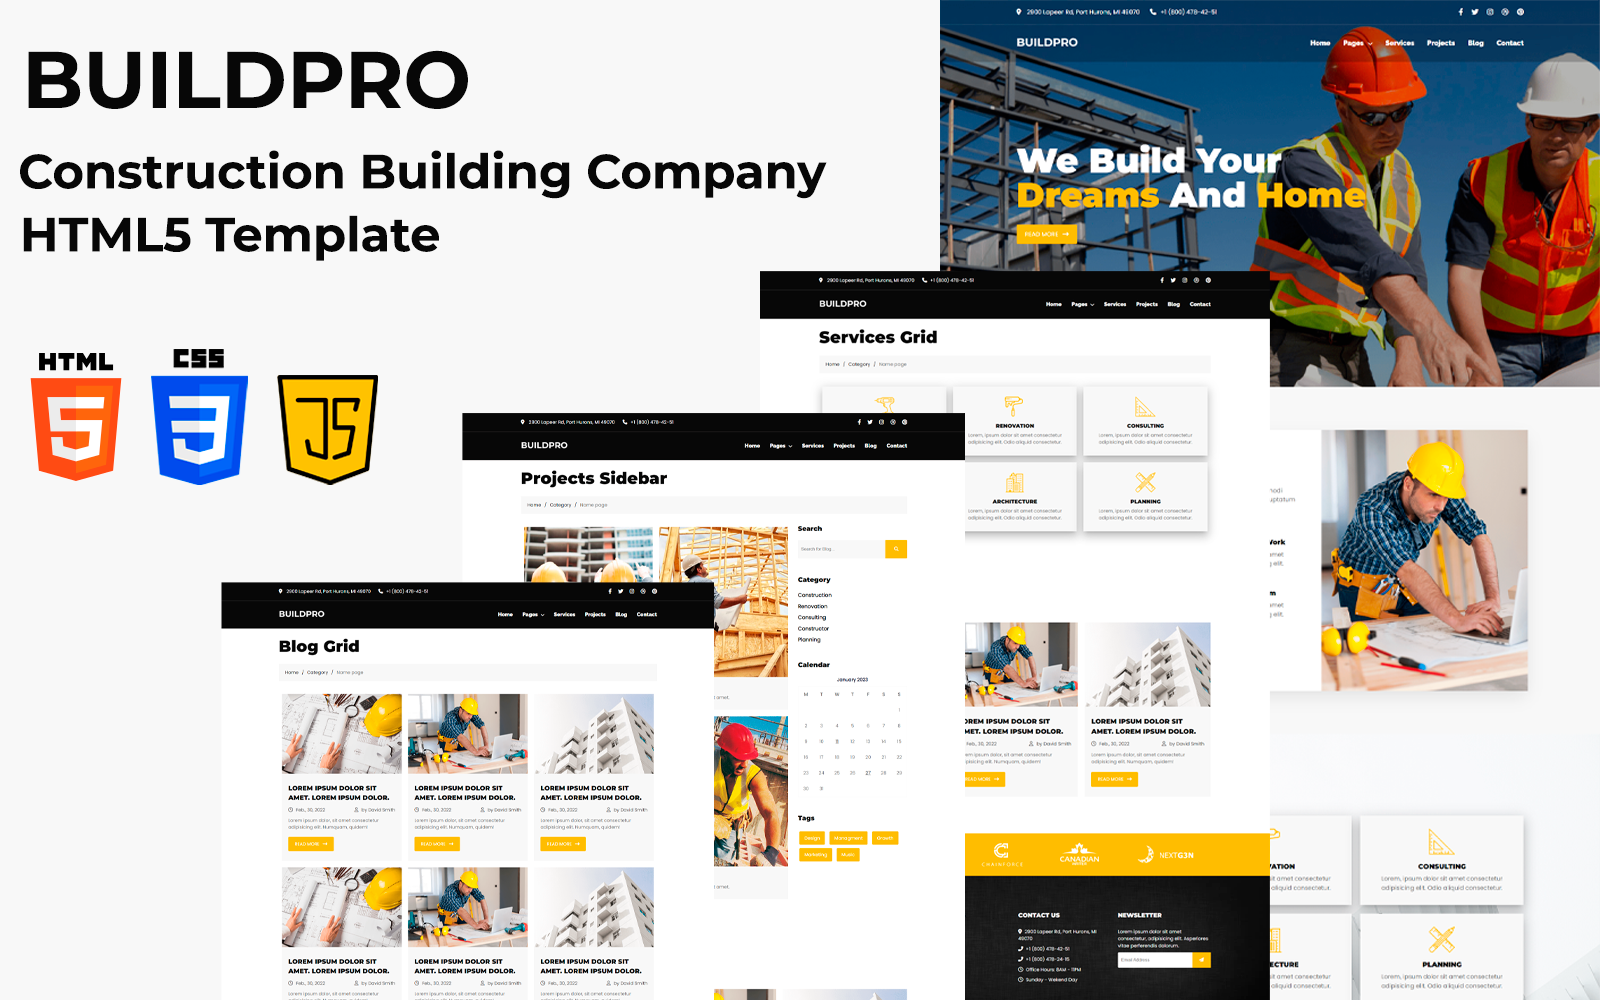 BUILDPRO - Construction Building Company HTML5 Template